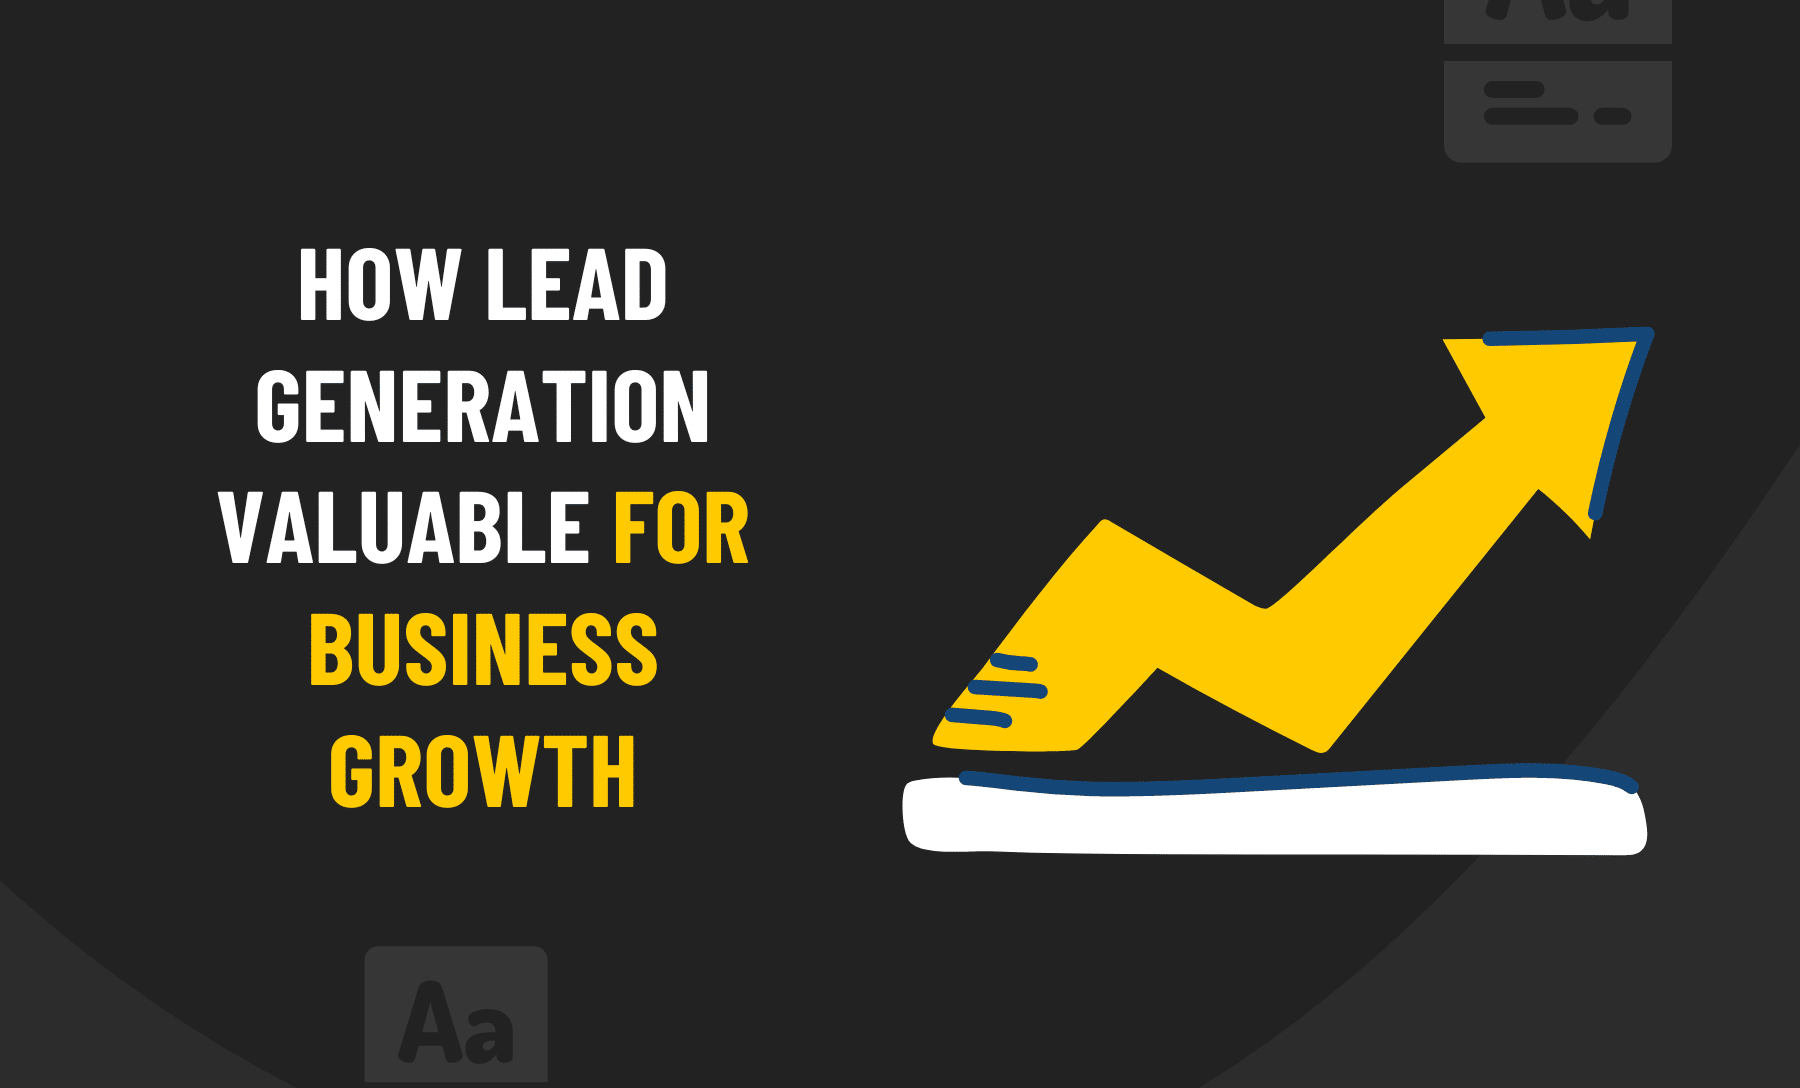 How lead generation valuable for business growth